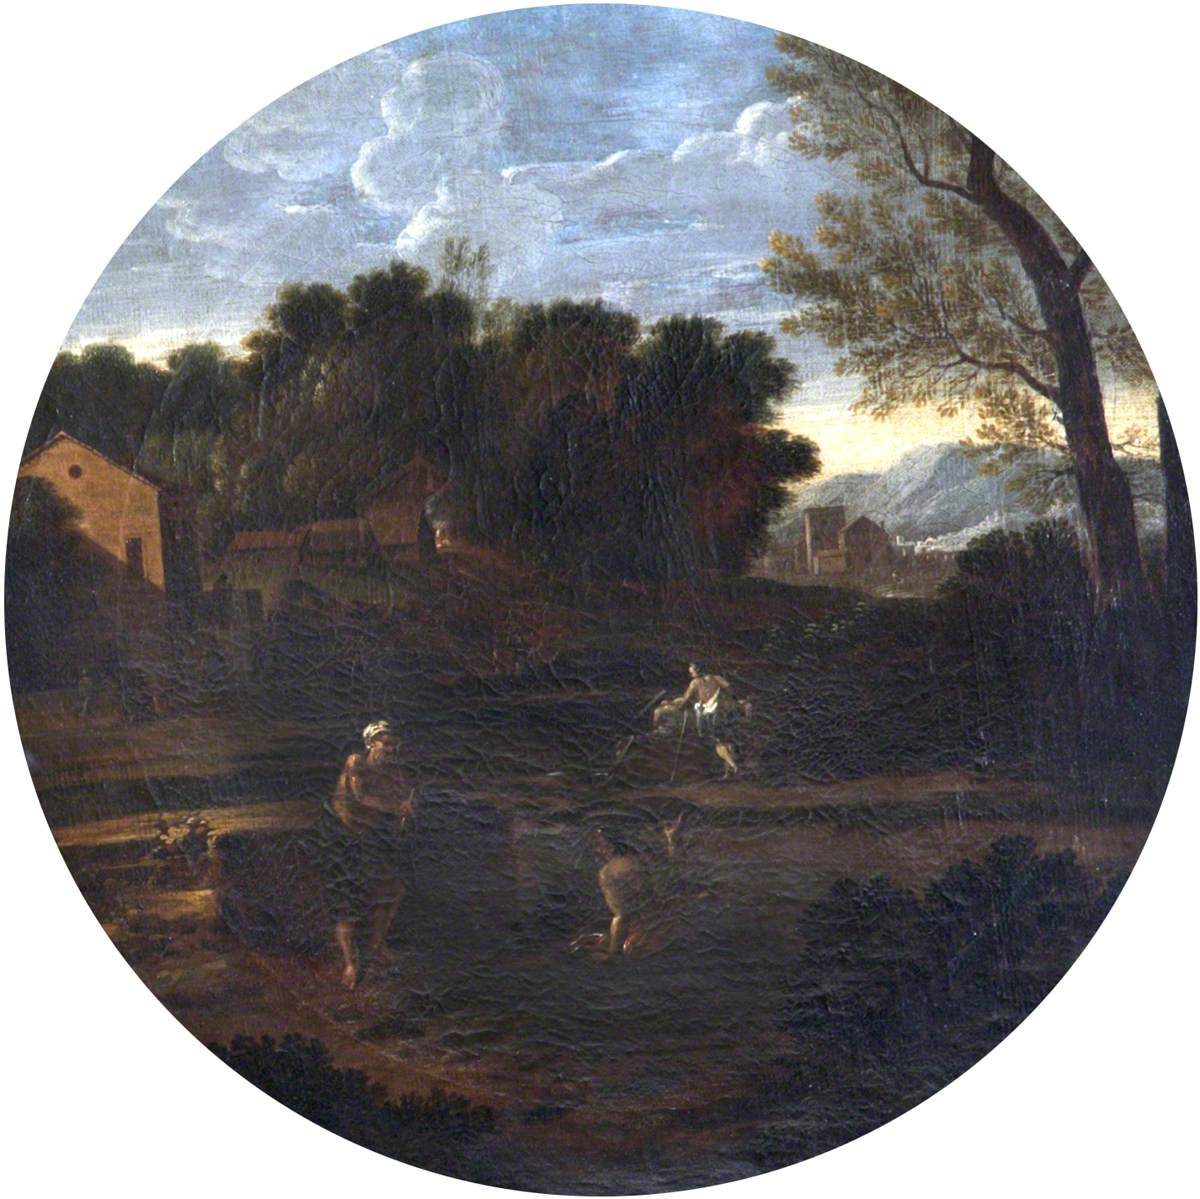 Classical Landscape and Figures in a Tondo